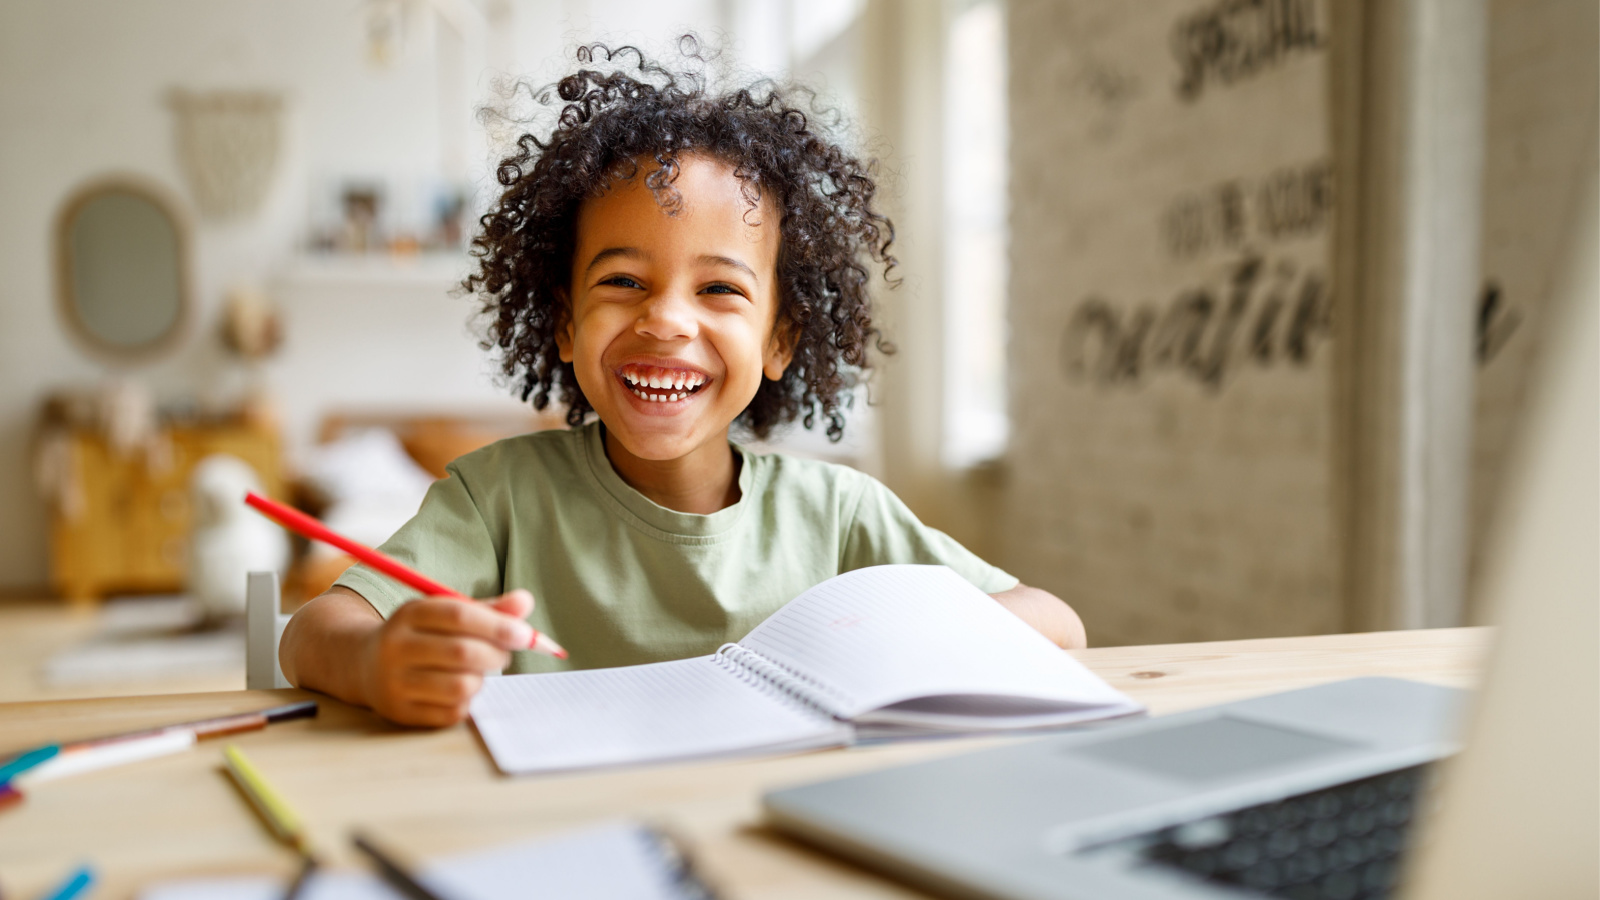 image credit: Evgeny Atamanenko/Shutterstock <p><span>Offering tutoring services in subjects they excel in can be a lucrative option for your teen. This not only provides a source of income but also reinforces their own knowledge. They can tutor younger students or peers, either in person or online. It’s a rewarding experience that benefits both the tutor and the student.</span></p>